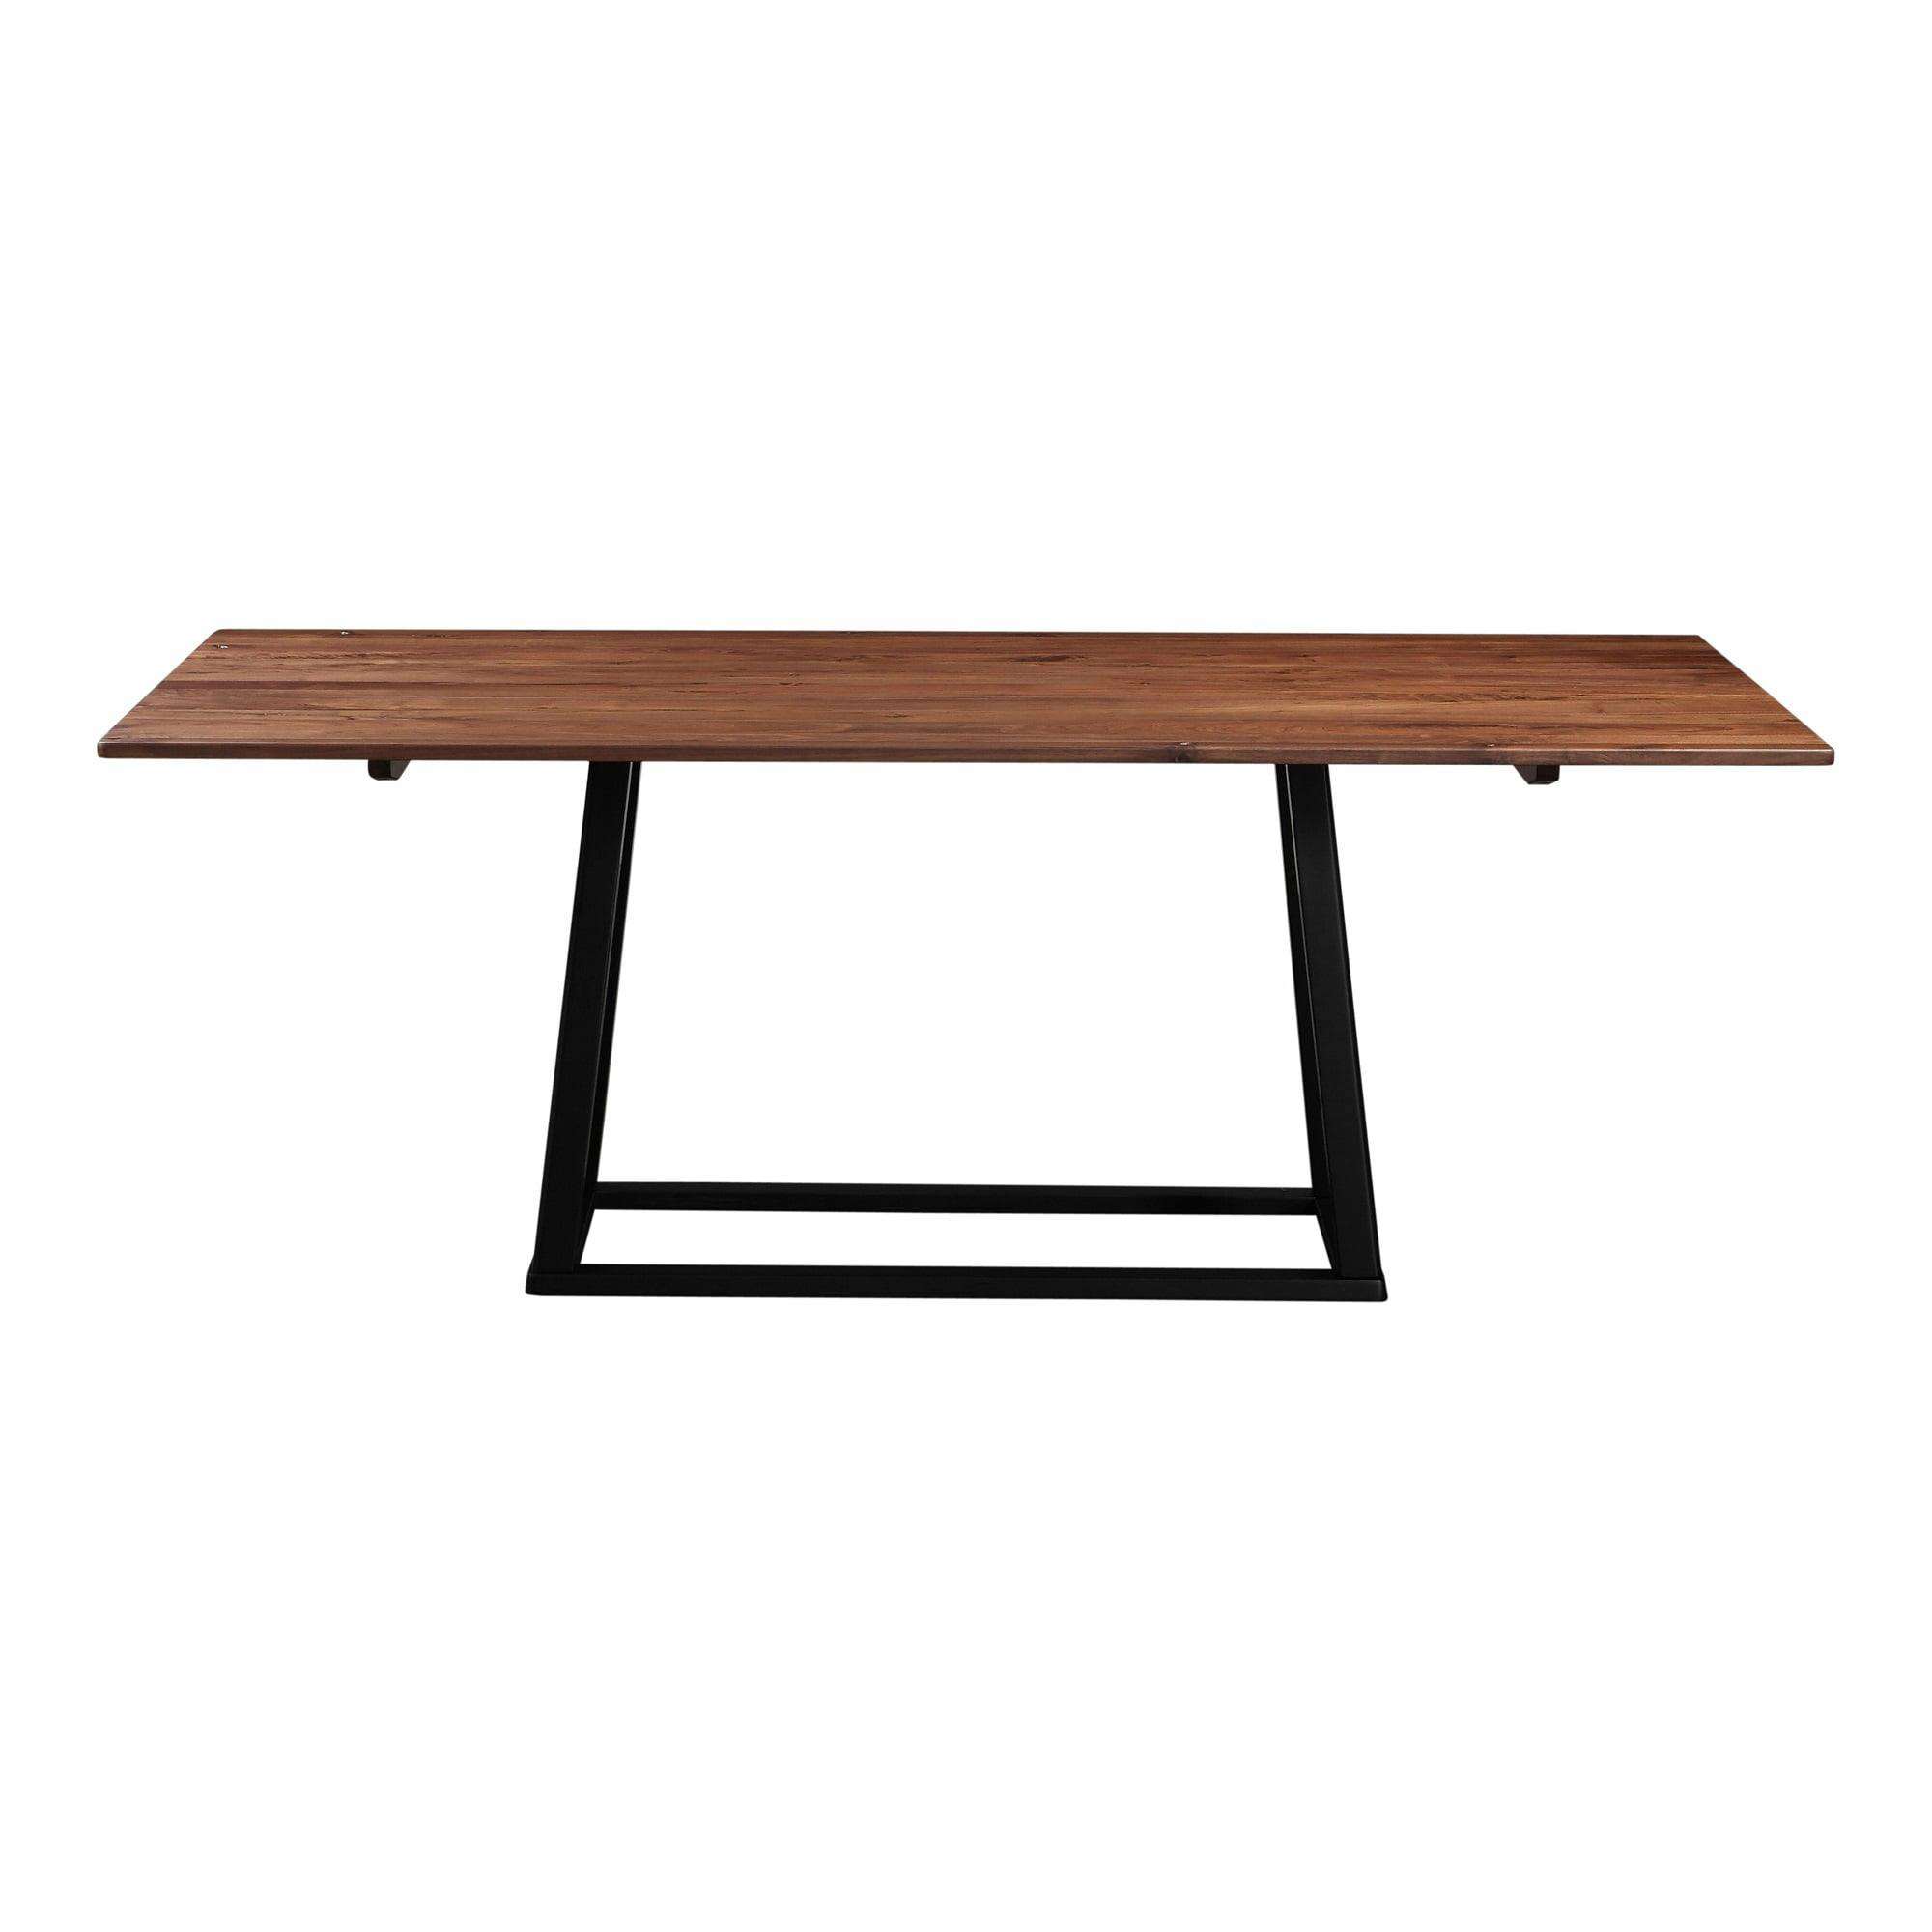 Contemporary Reclaimed Wood Rectangular Dining Table in Black/Brown